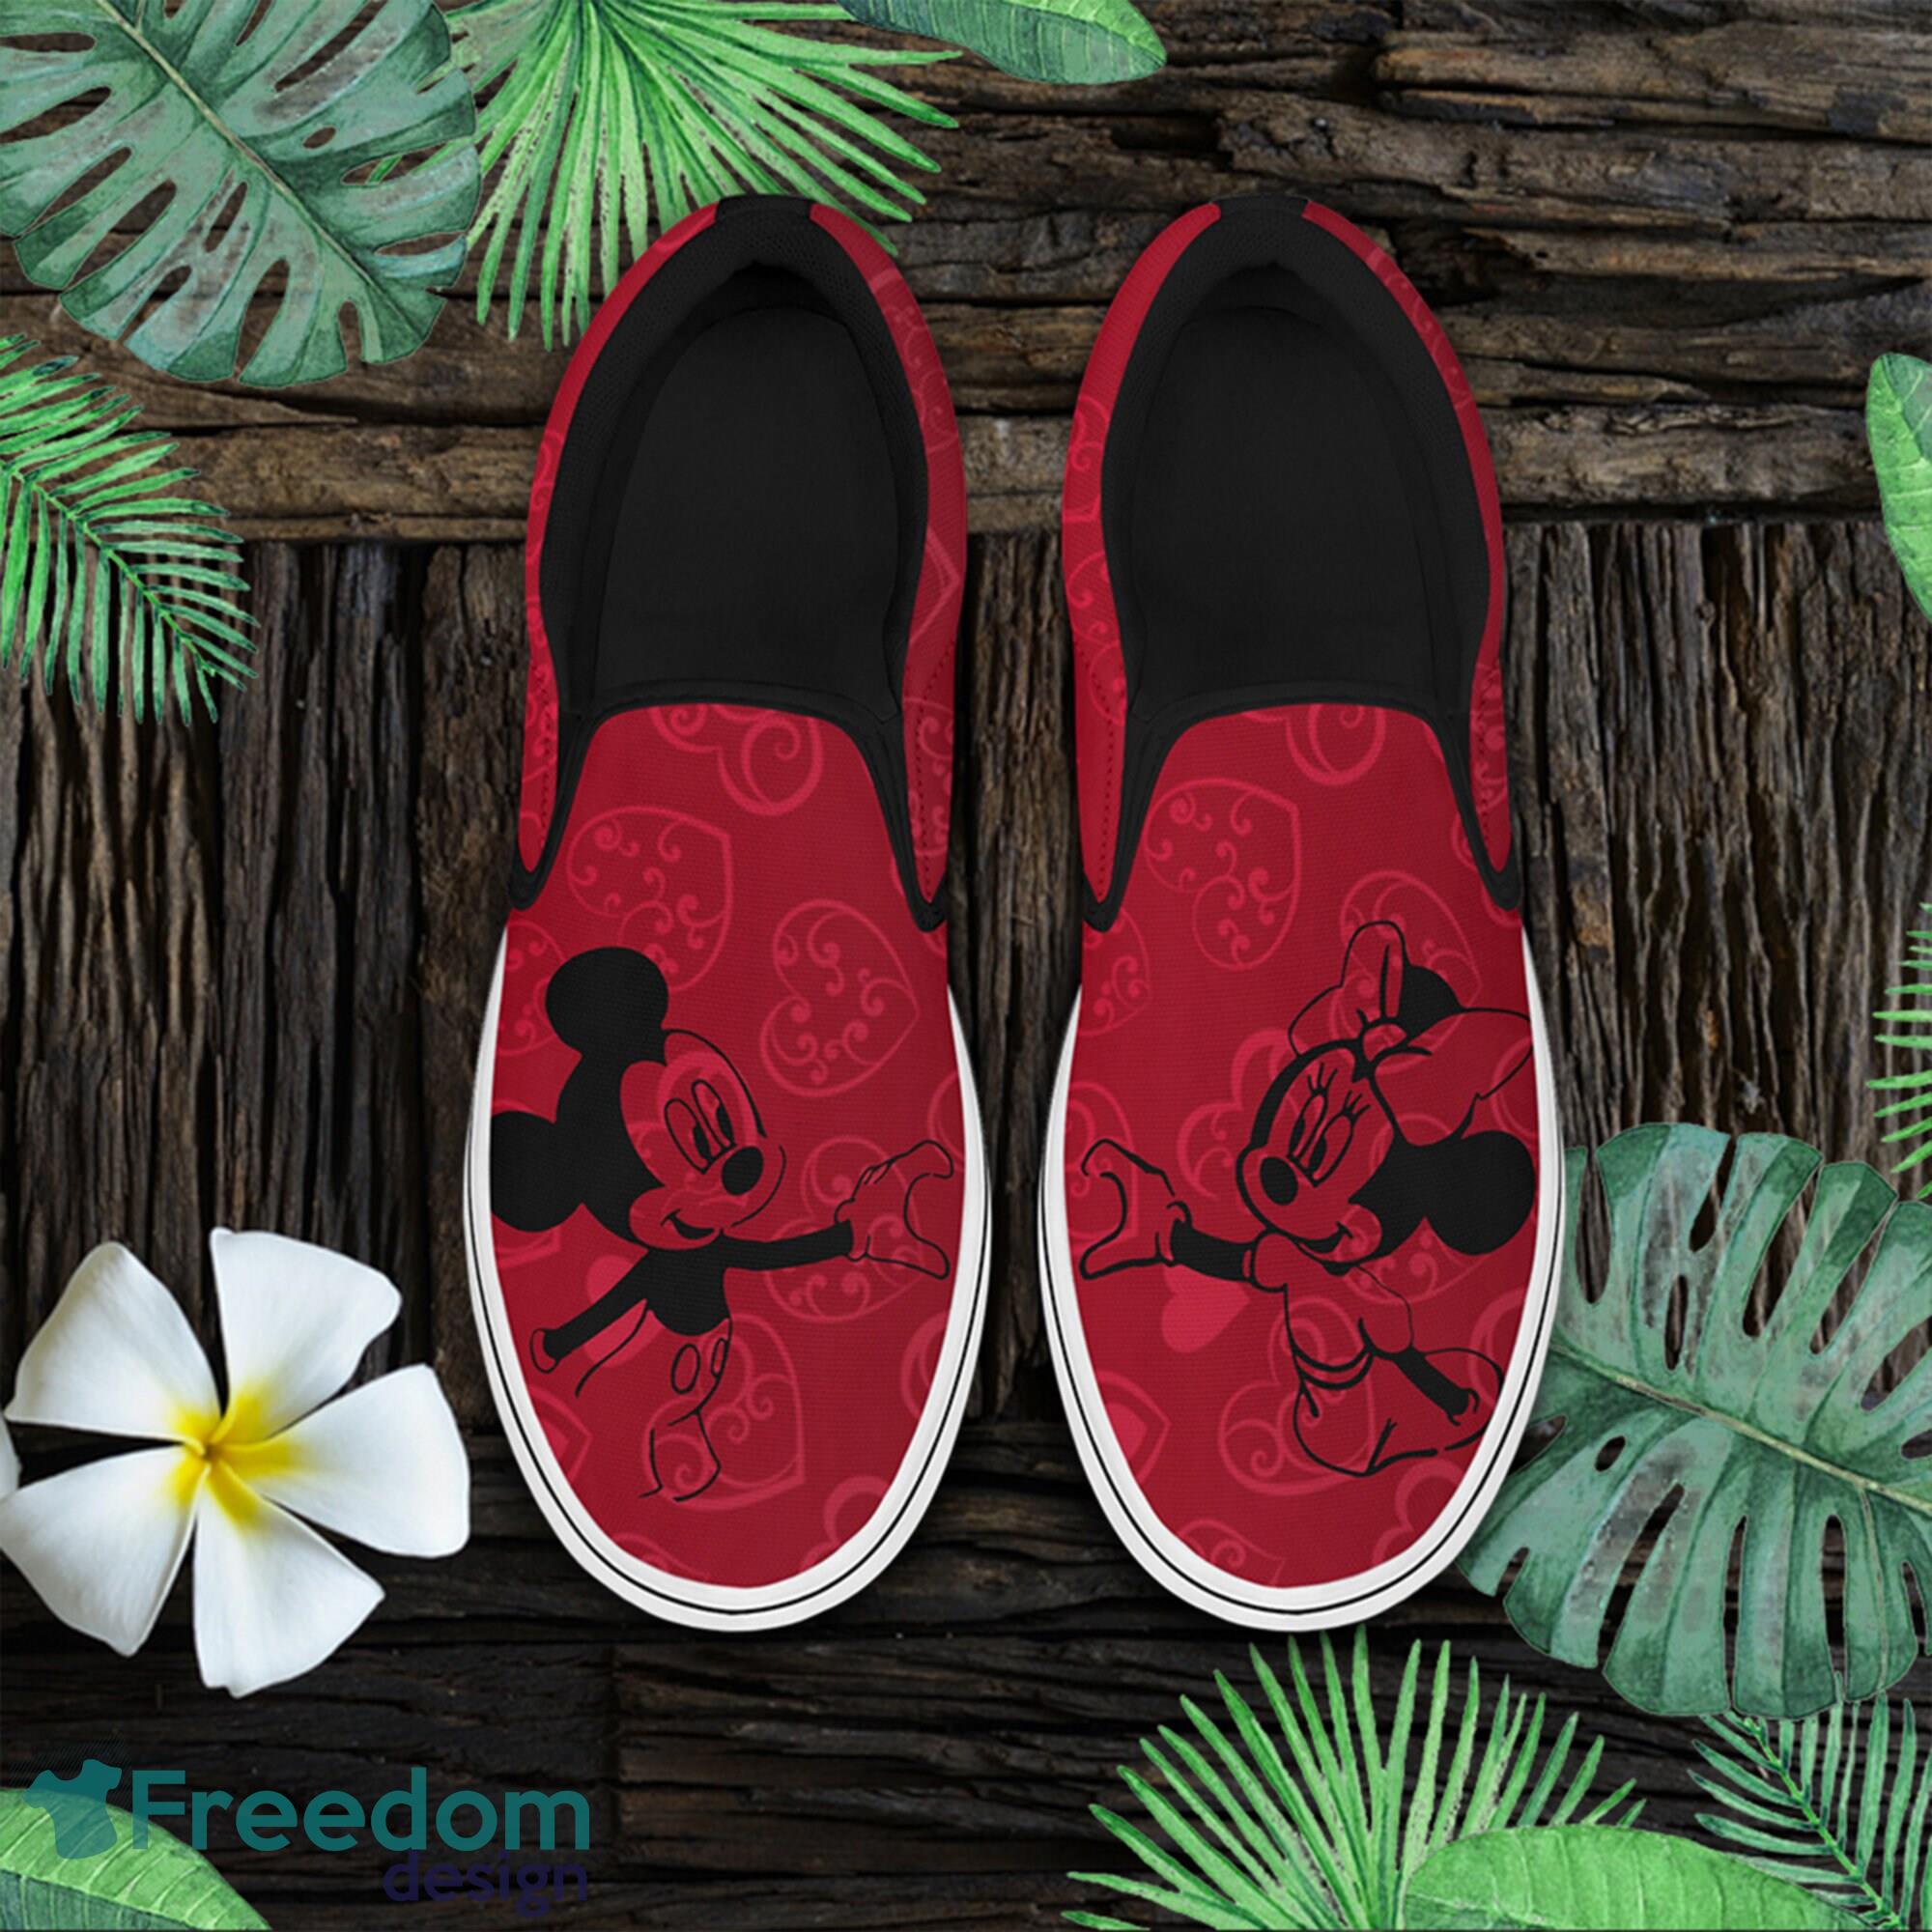 Lookin' Like A Snack Gus-Gus Slip On Shoes Disney Cinderella Shoes Disney  Snacks Disneyland Trip Shoes - Freedomdesign